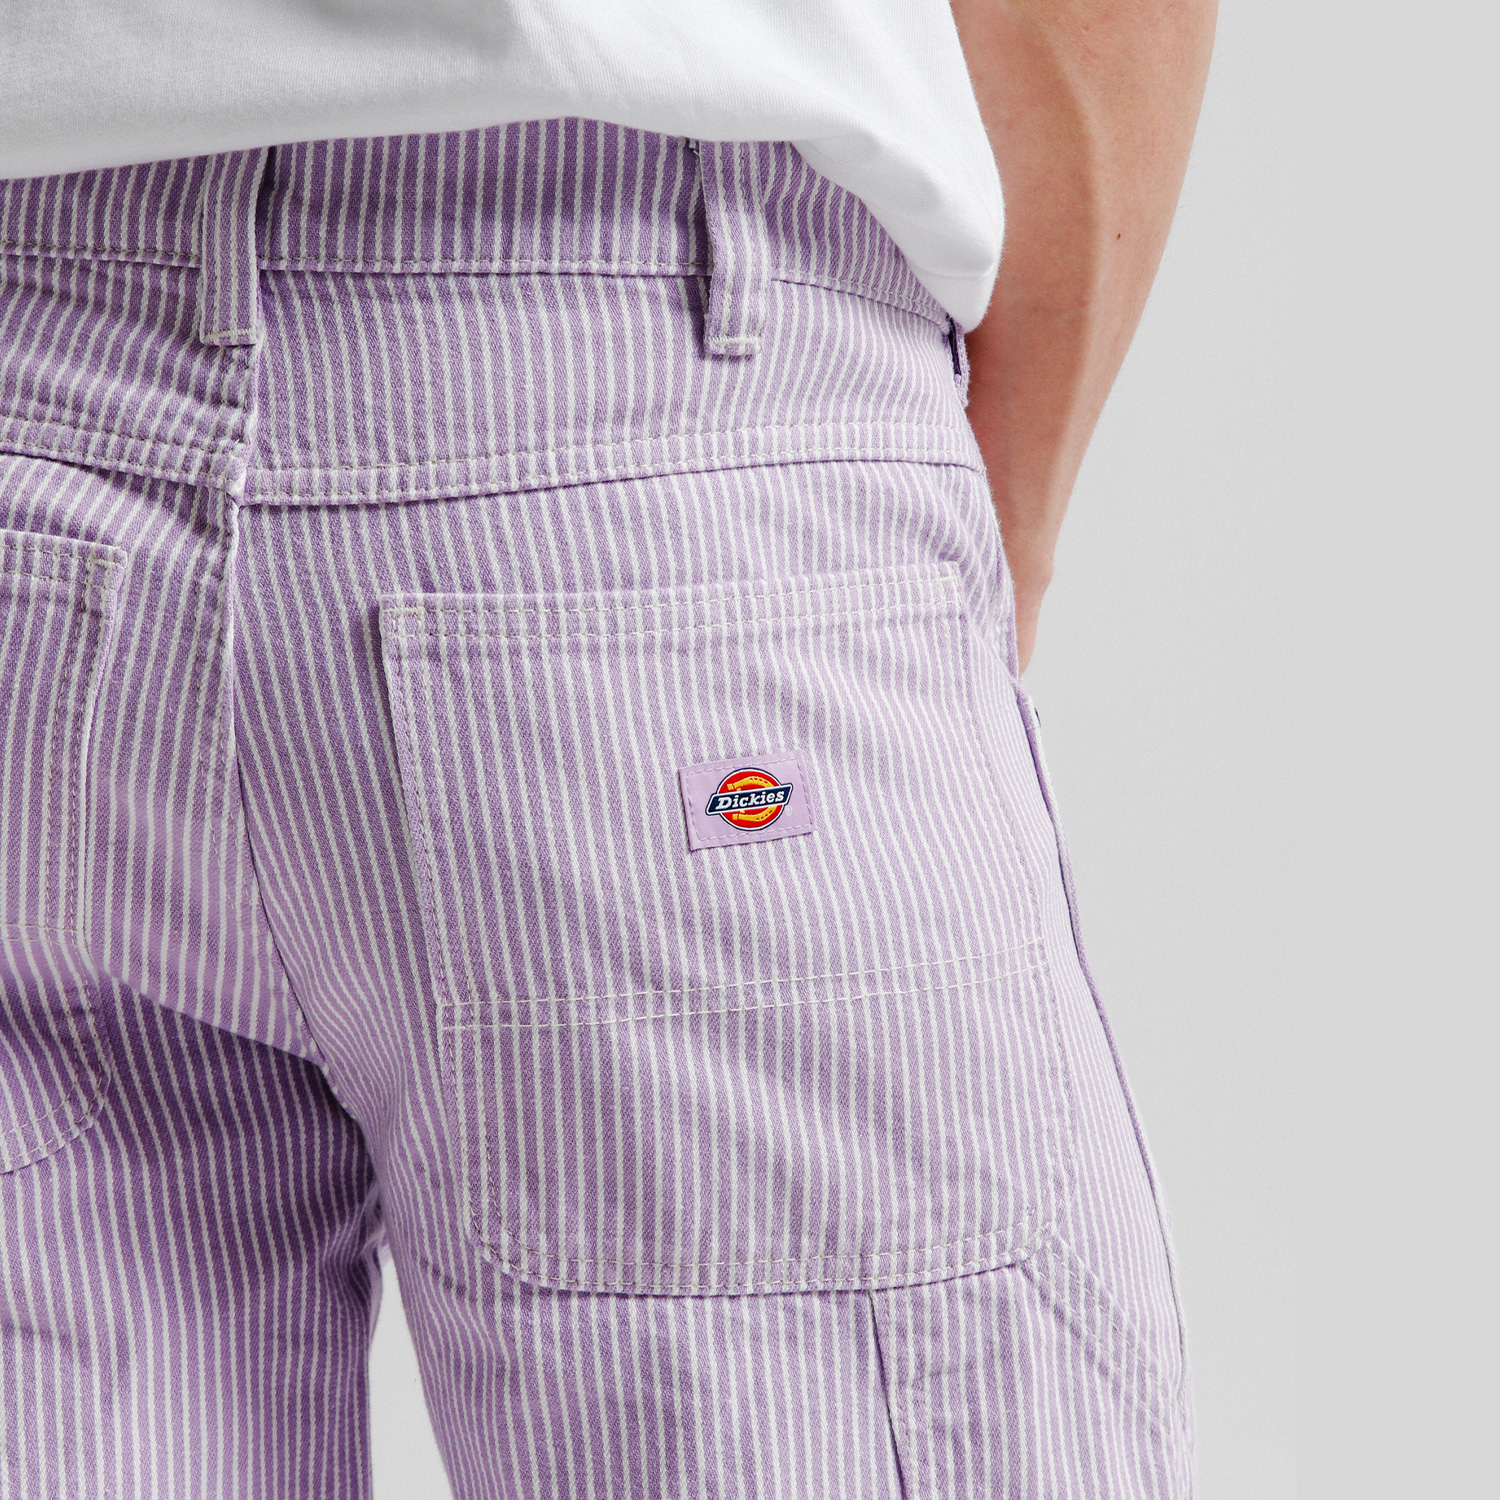 Check out the new Dickies arrivals